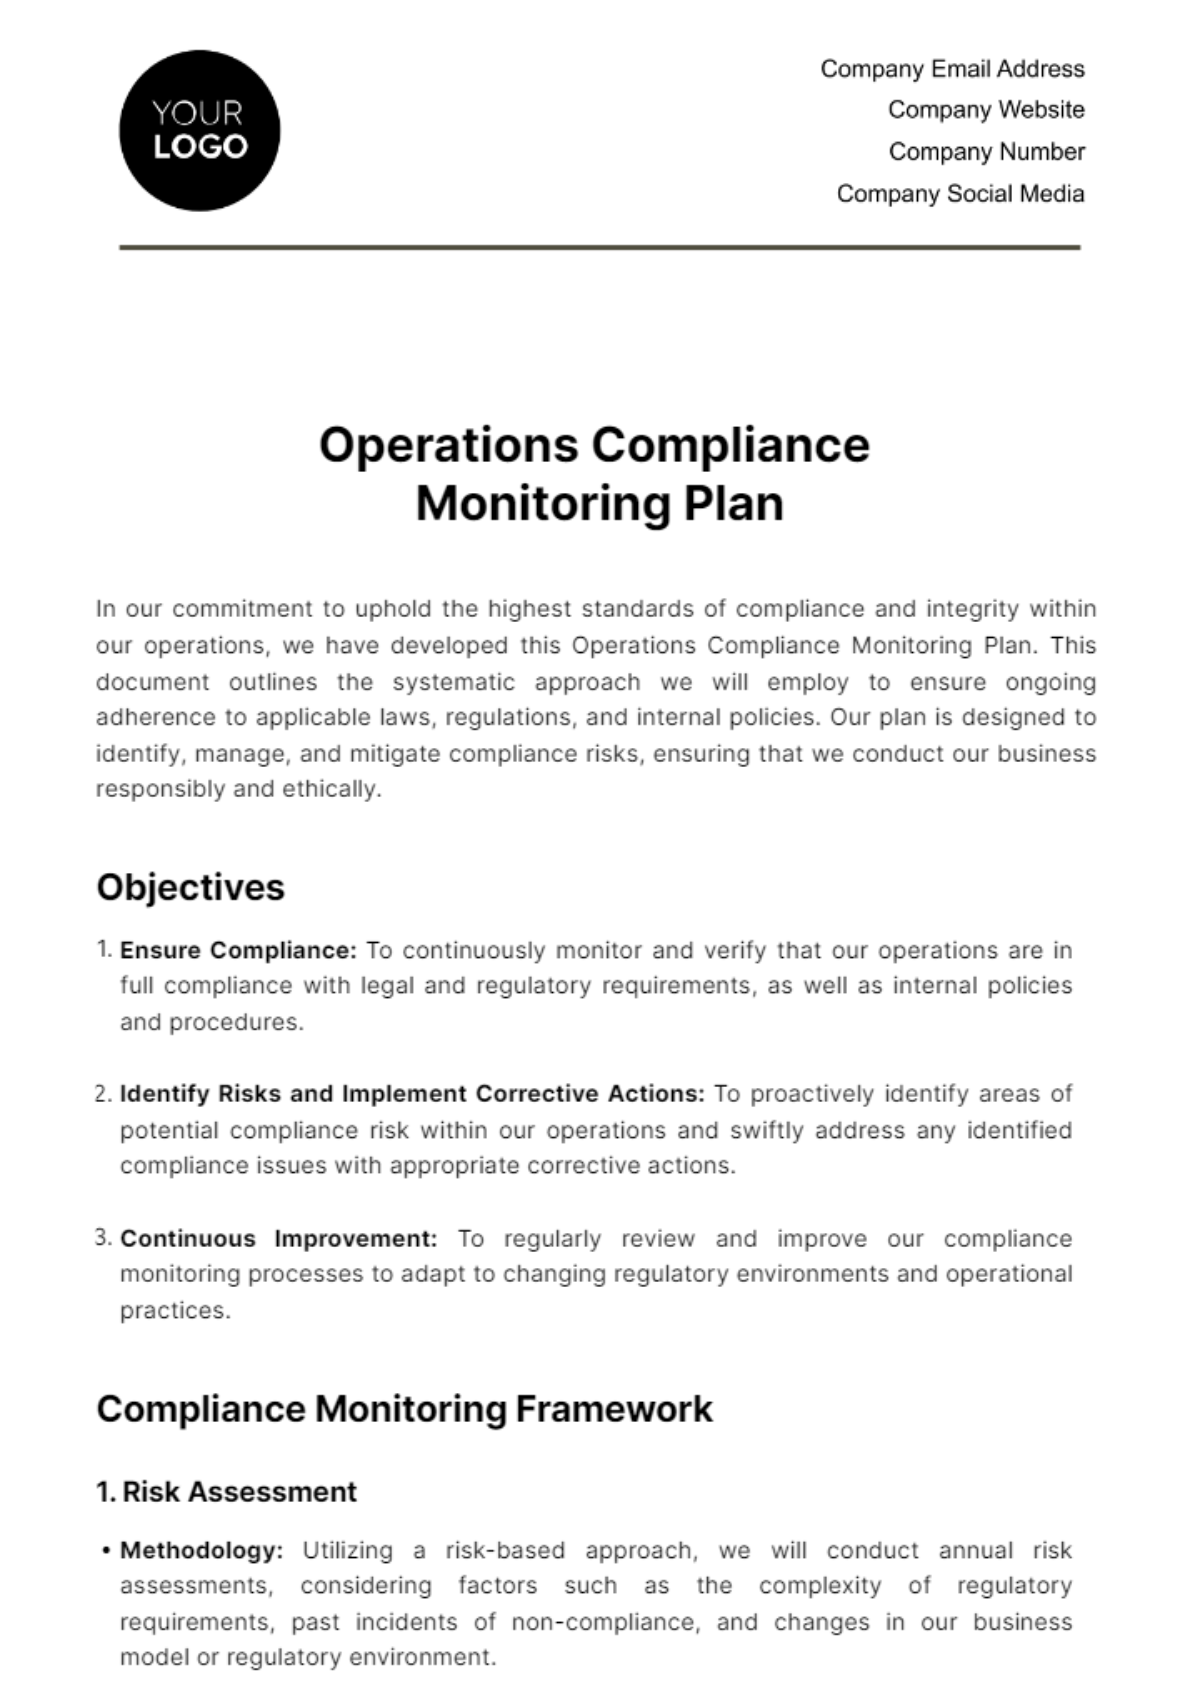 Operations Compliance Monitoring Plan Template